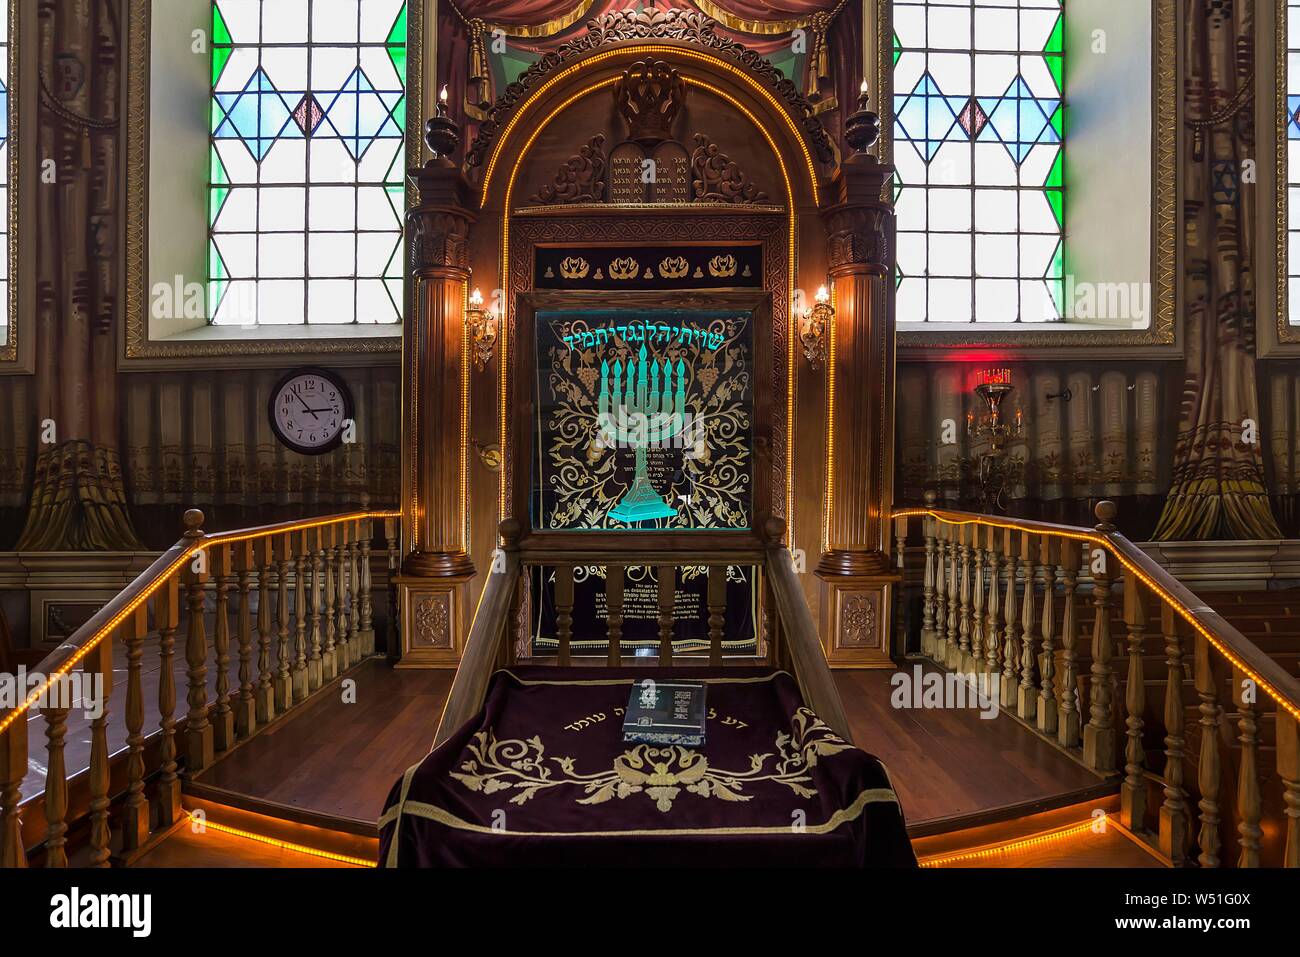 A Parochet, curtain in front of the Torah shrine in the interior of the Tsori Gilod Synagogue, Lviv, Ukraine Stock Photo